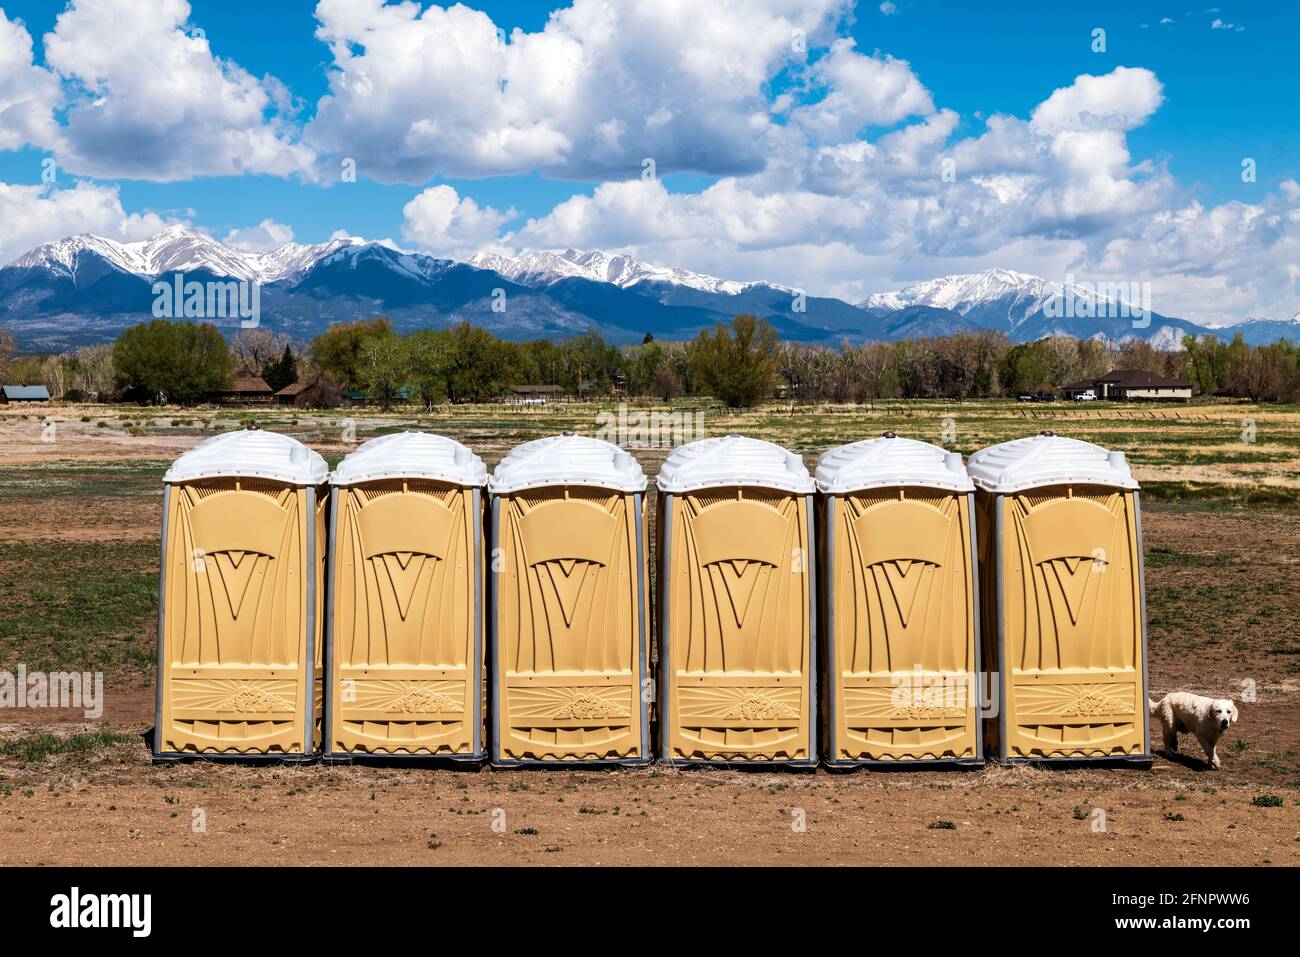 Platinum Golden Retriever dog walking by portable toilets - potties set up on central Colorado ranch to accomodate an event Stock Photo